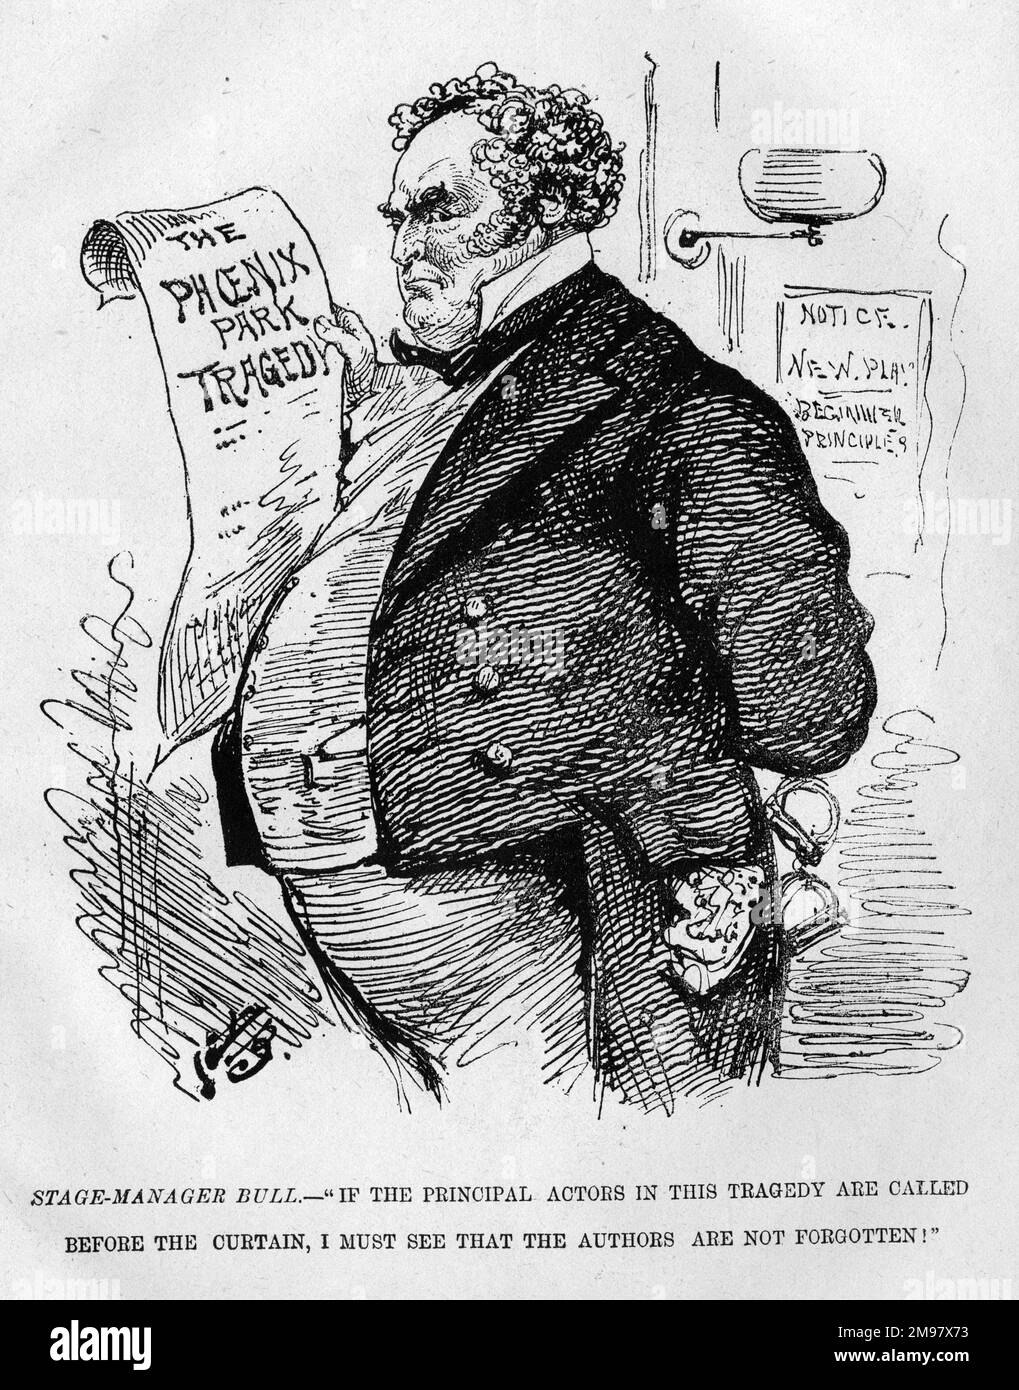 Cartoon, John Bull as stage manager, The Phoenix Park Tragedy.  A comment on the murders of Lord Frederick Cavendish and Thomas Henry Burke in Phoenix Park, Dublin, on 6 May 1882 and the subsequent arrest and trial of suspects. Stock Photo